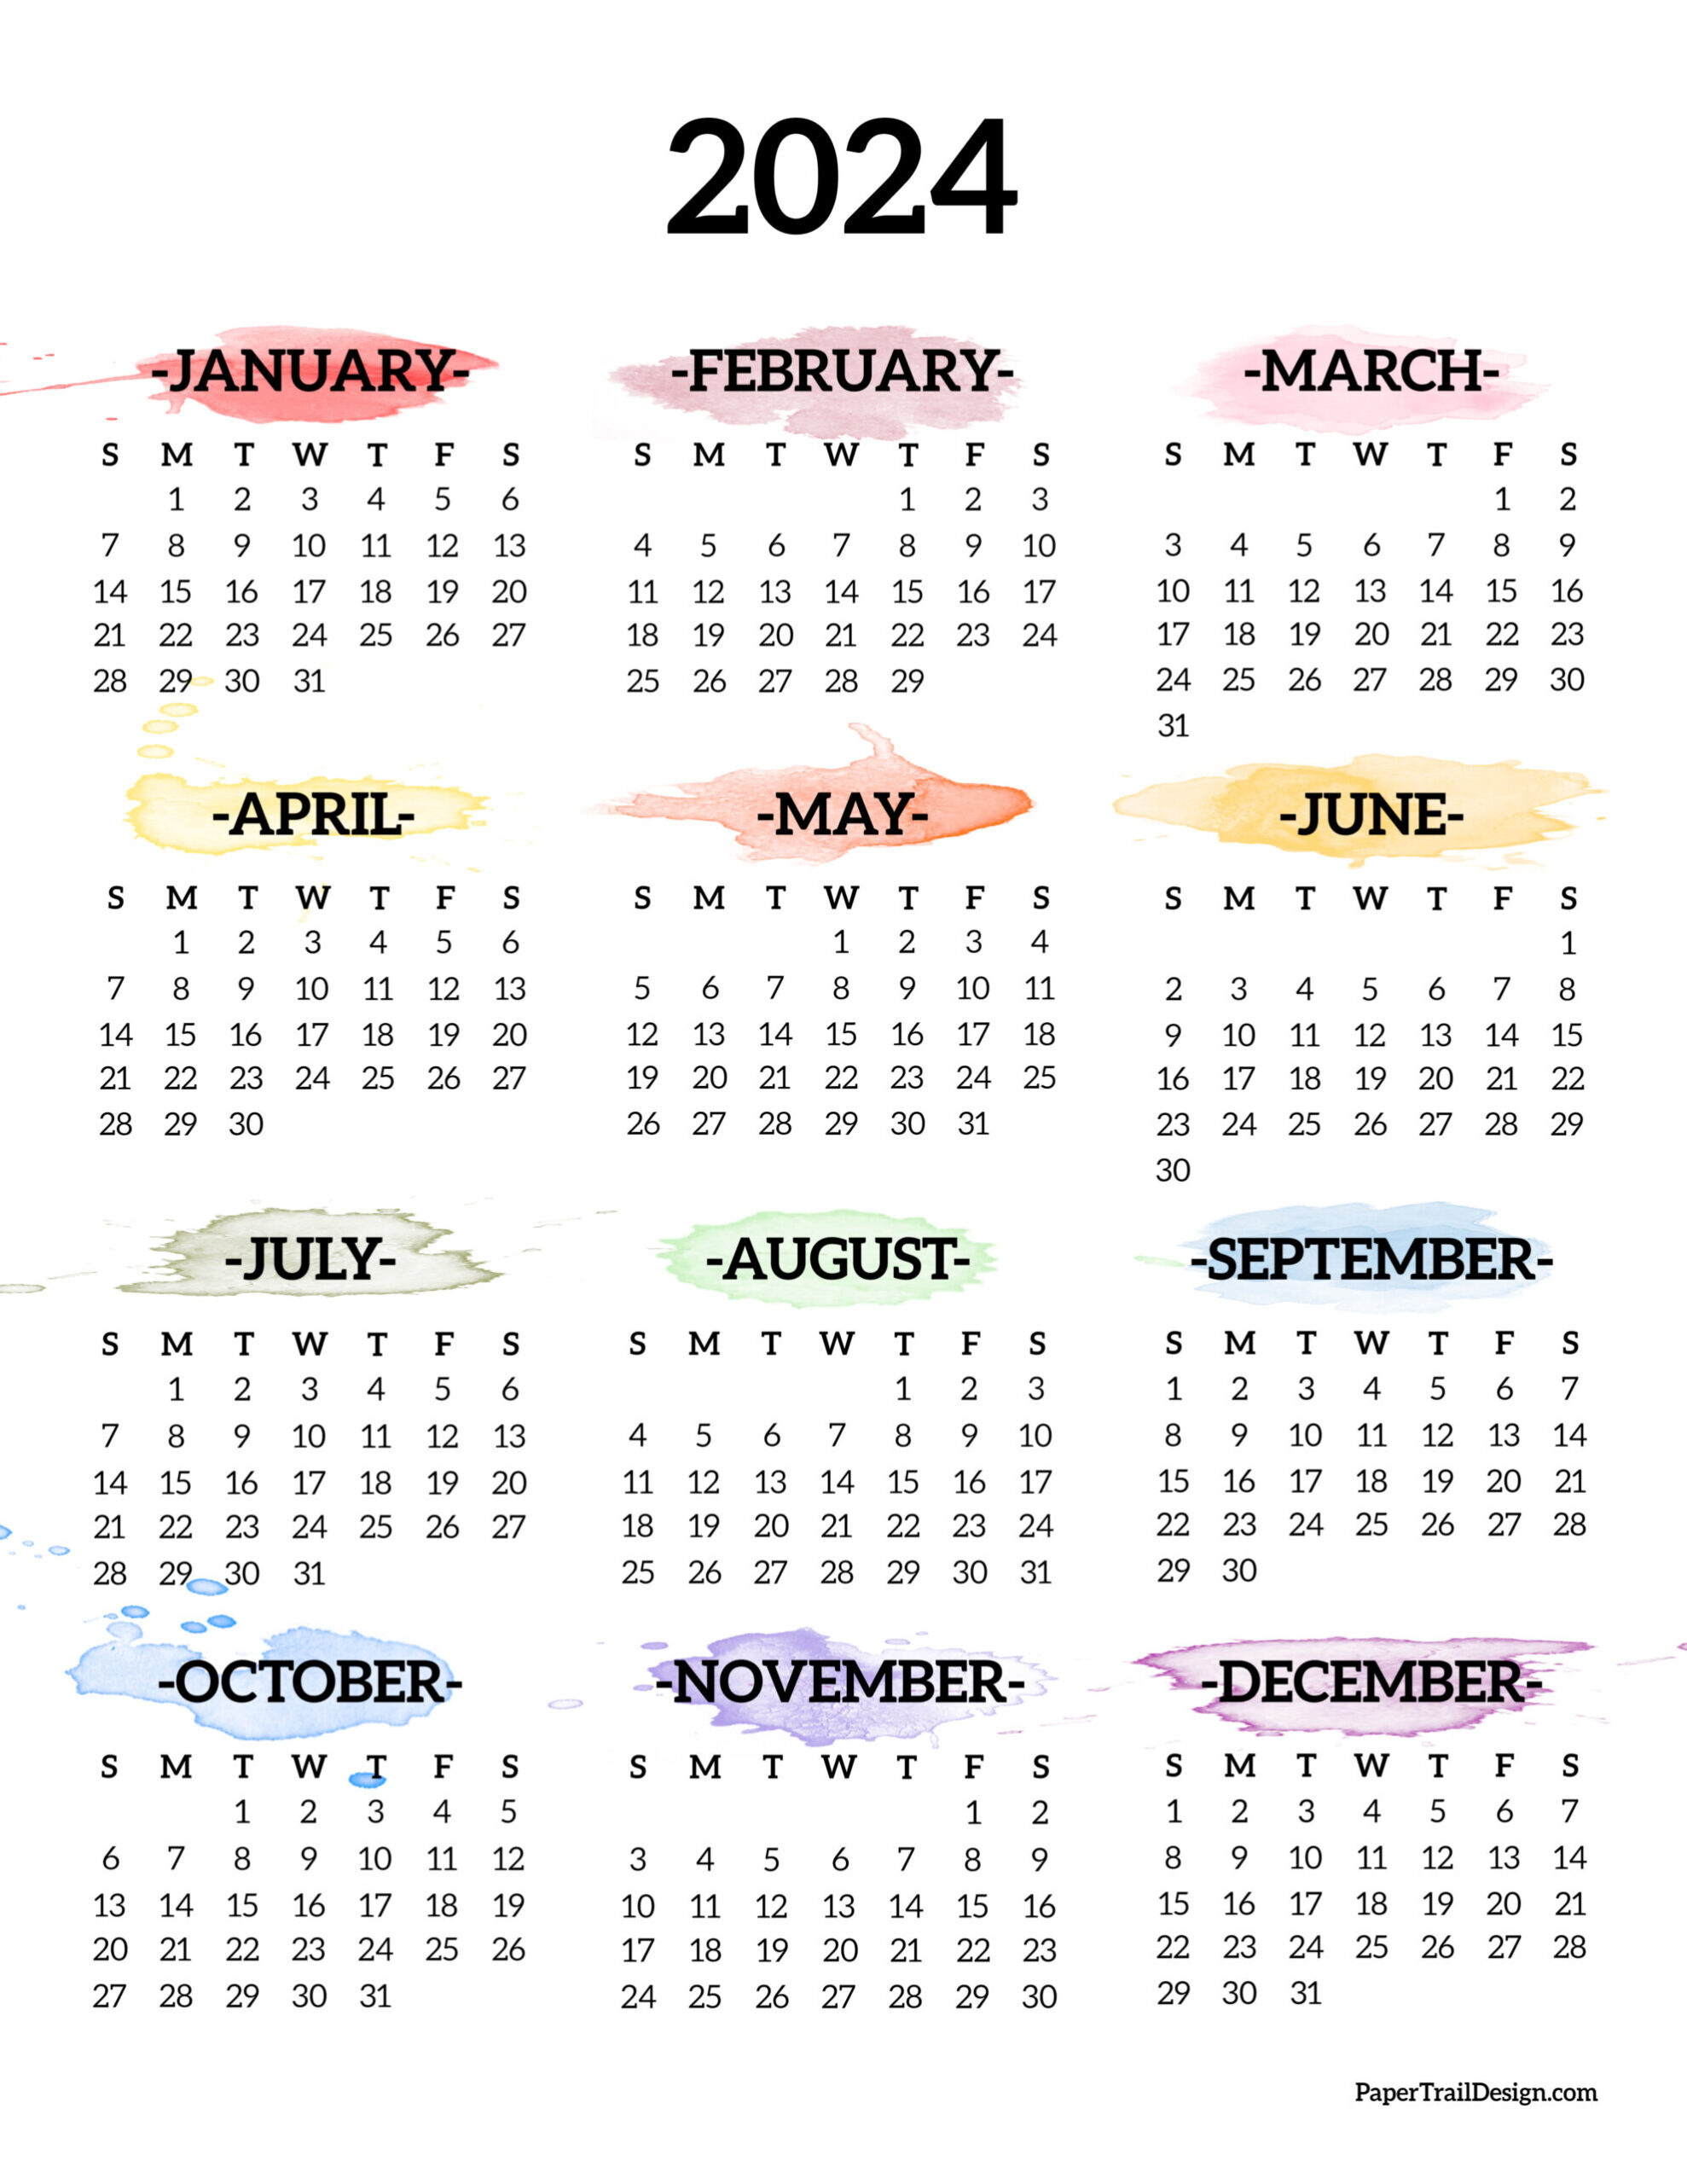 Calendar 2024 Printable One Page - Paper Trail Design | Yearly Calendar For 2024